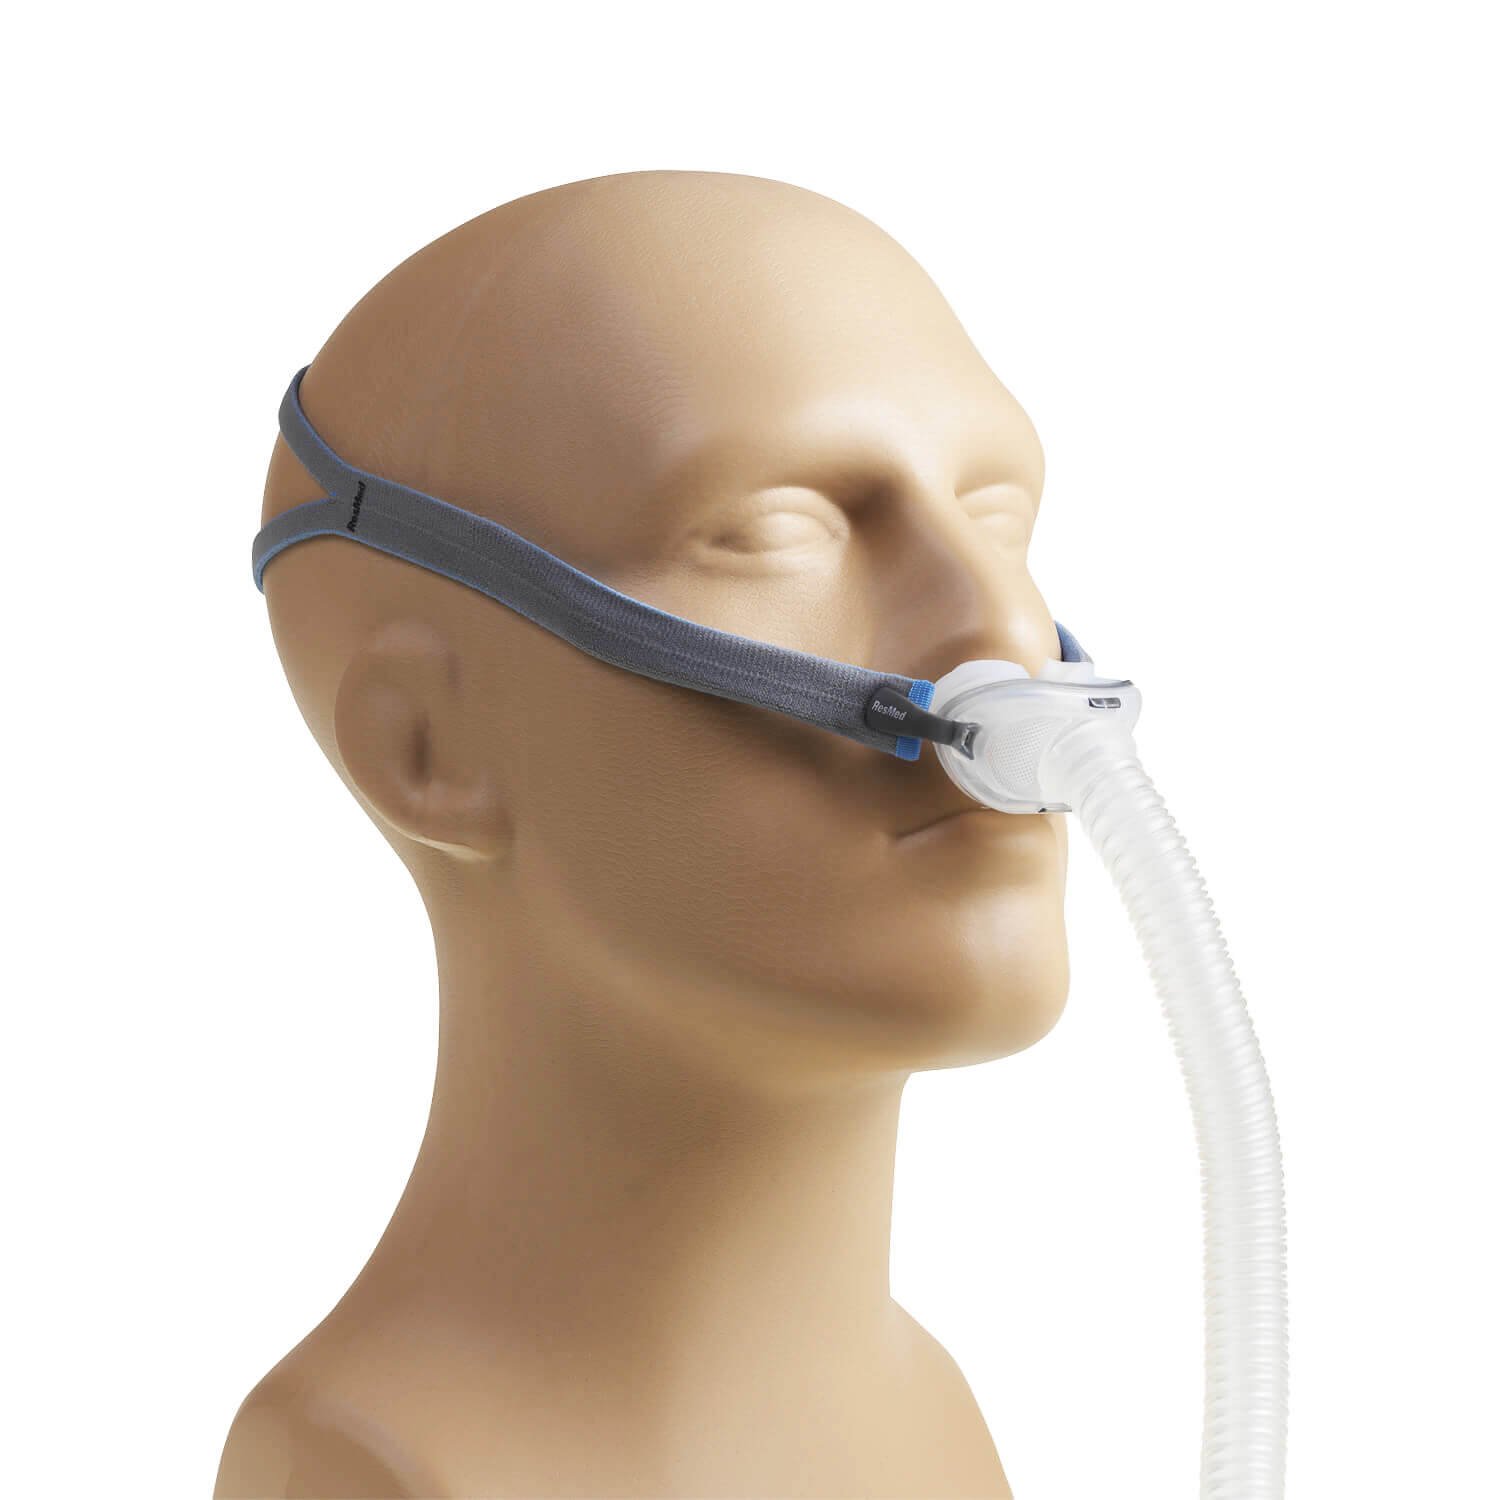 New Airfit P10 Nasal Pillow Cpap Mask With Headgear Kit Size Sml In One Package 7425